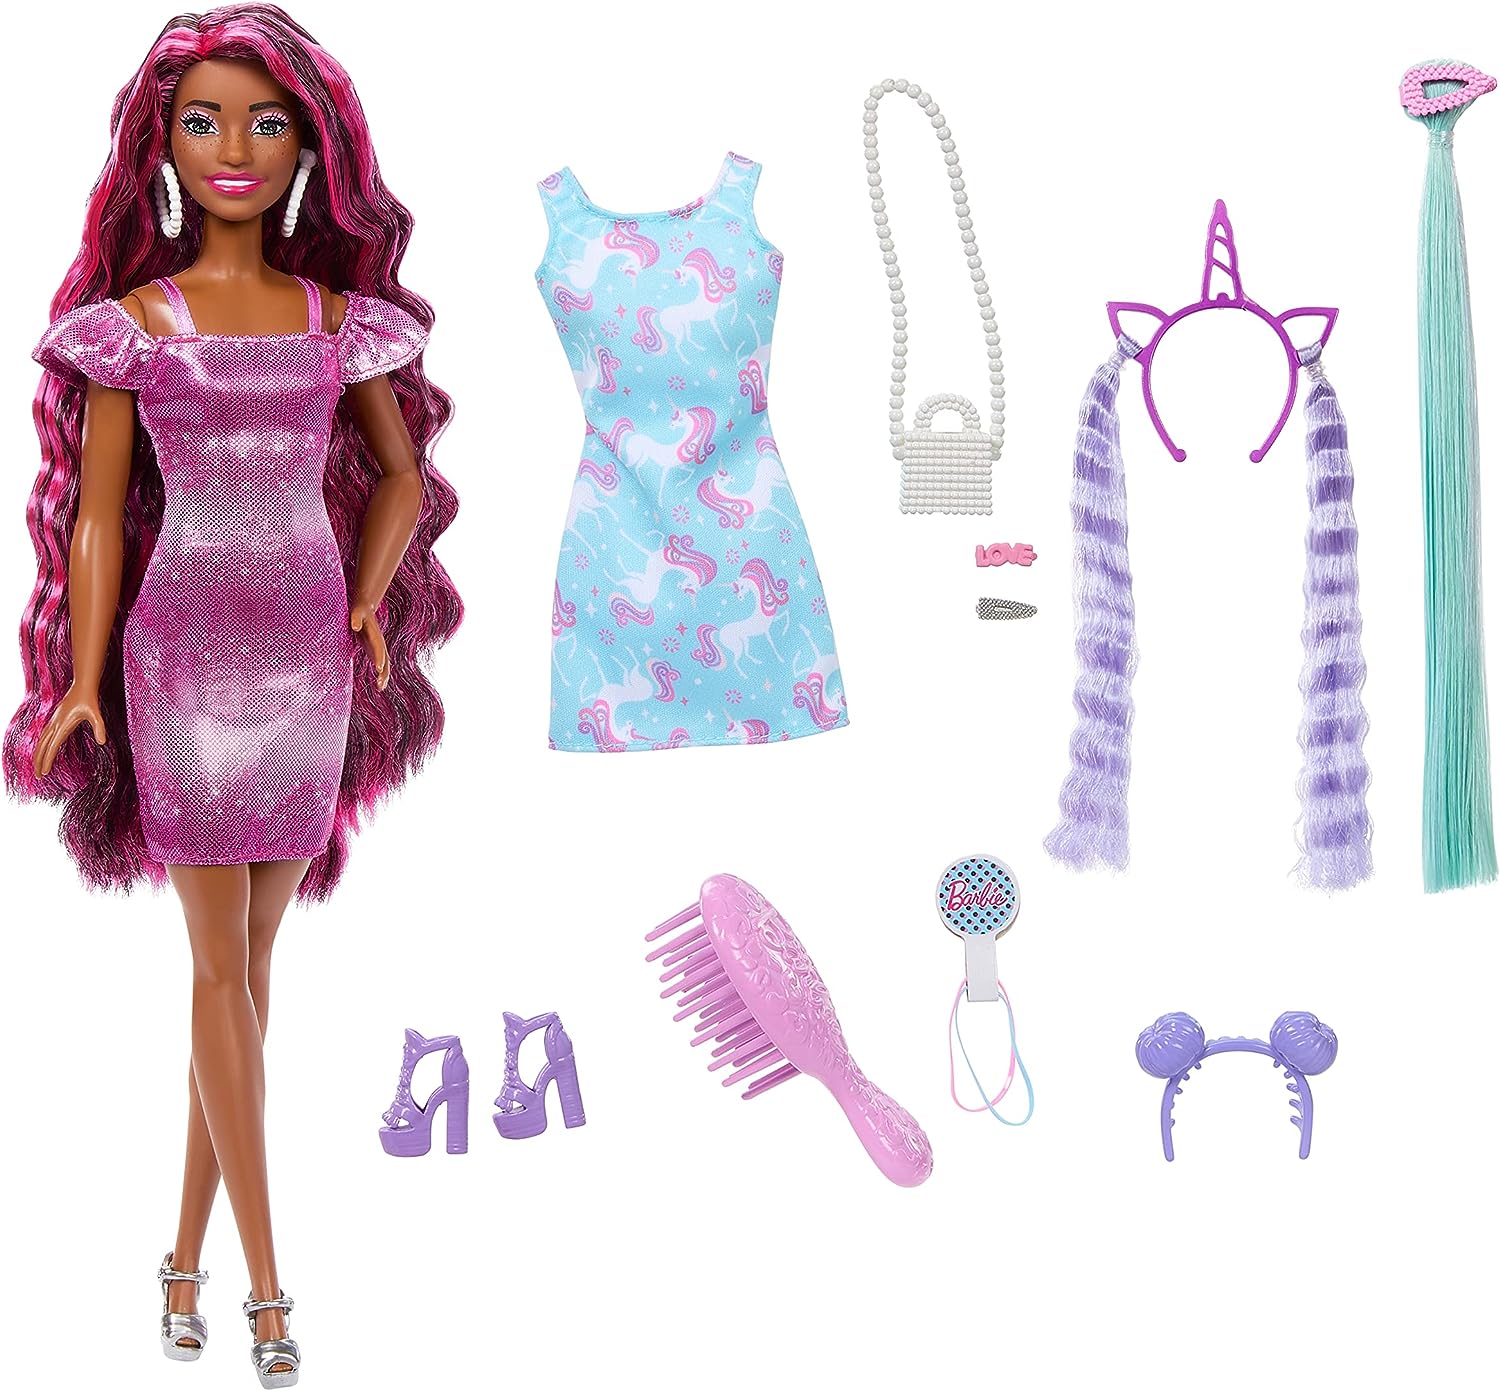 Barbie Fun & Fancy Brunette Hair Doll with Extra-Long Colorful Hair and Shimmery Pink Dress and 10 Hair and Fashion Play Accessories for Kids Ages 3+